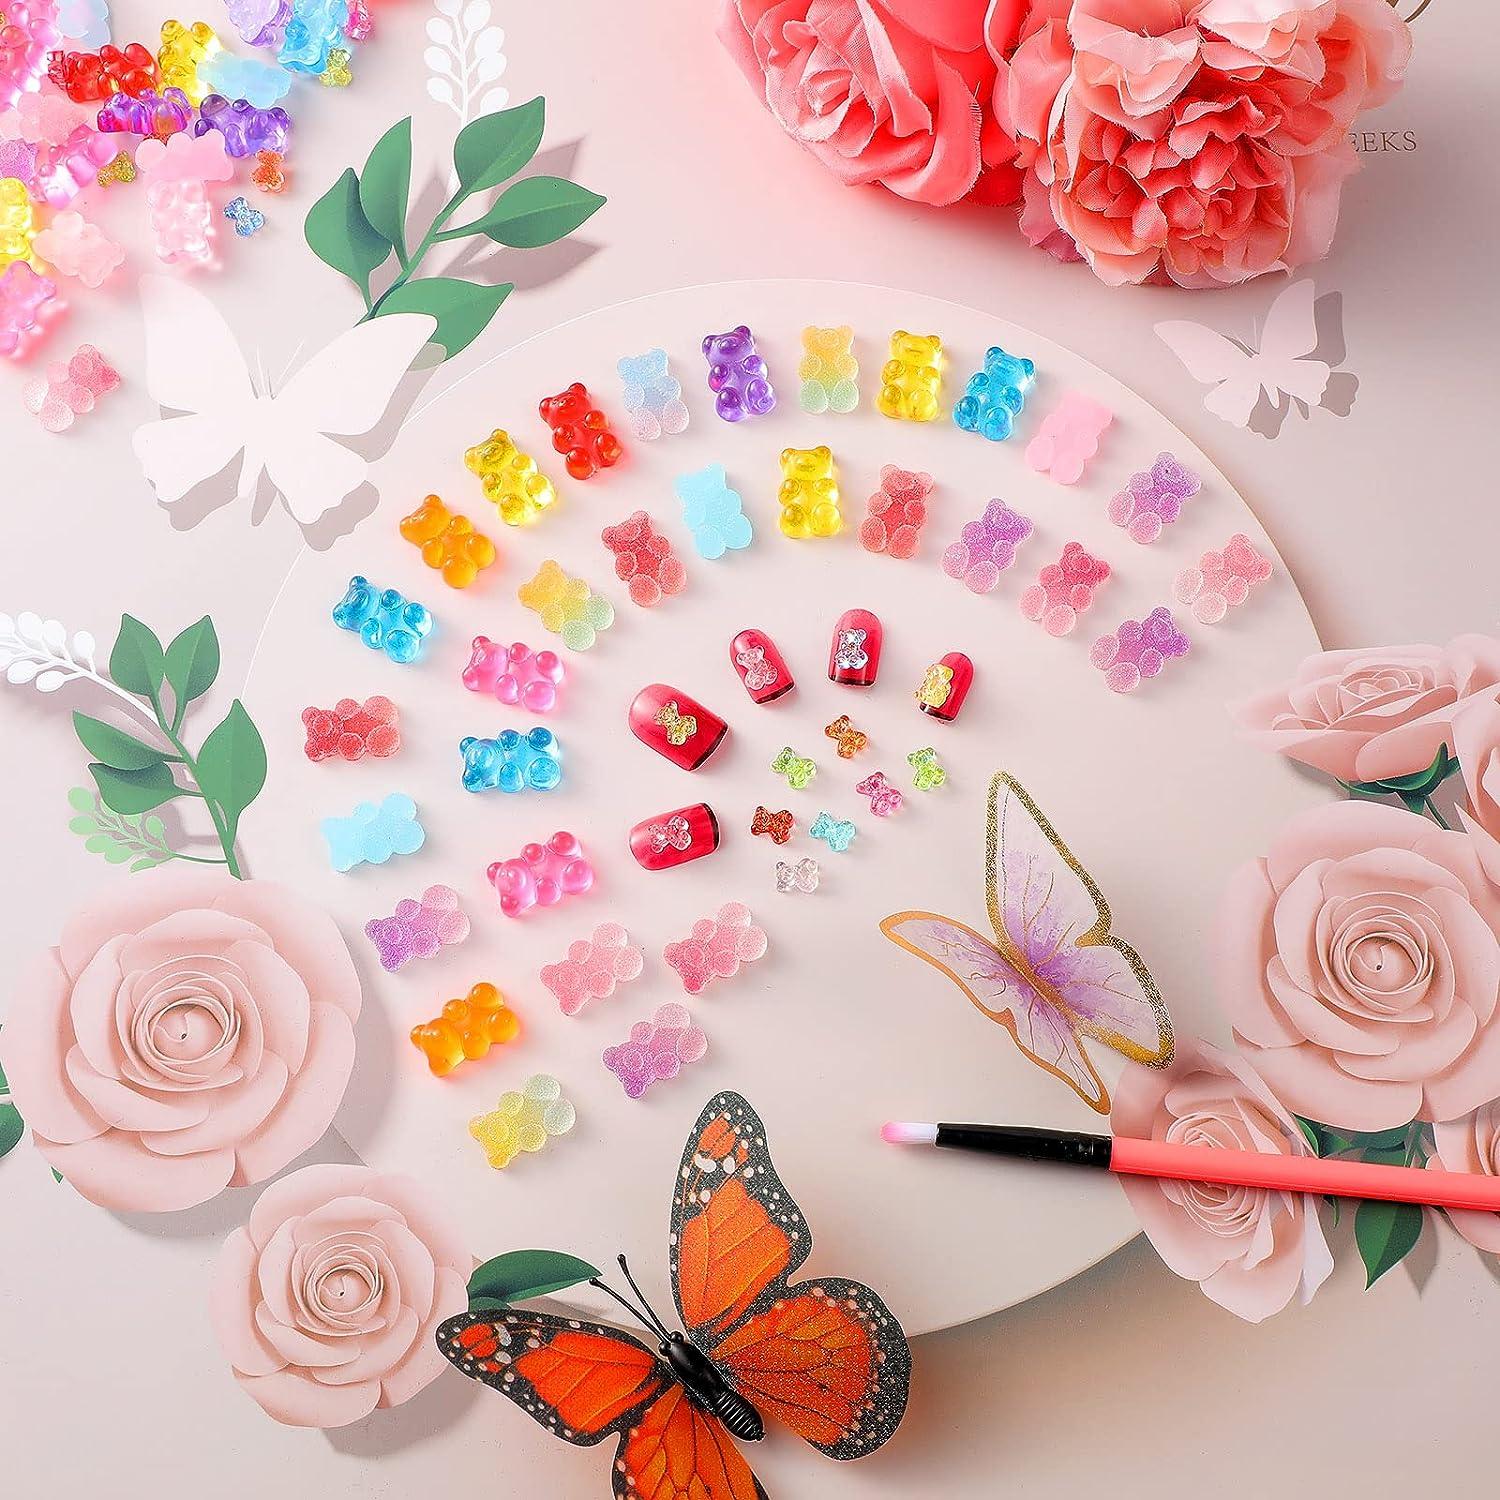 Realistic Flower Stickers for Arts and Crafts 240 / Multicolor